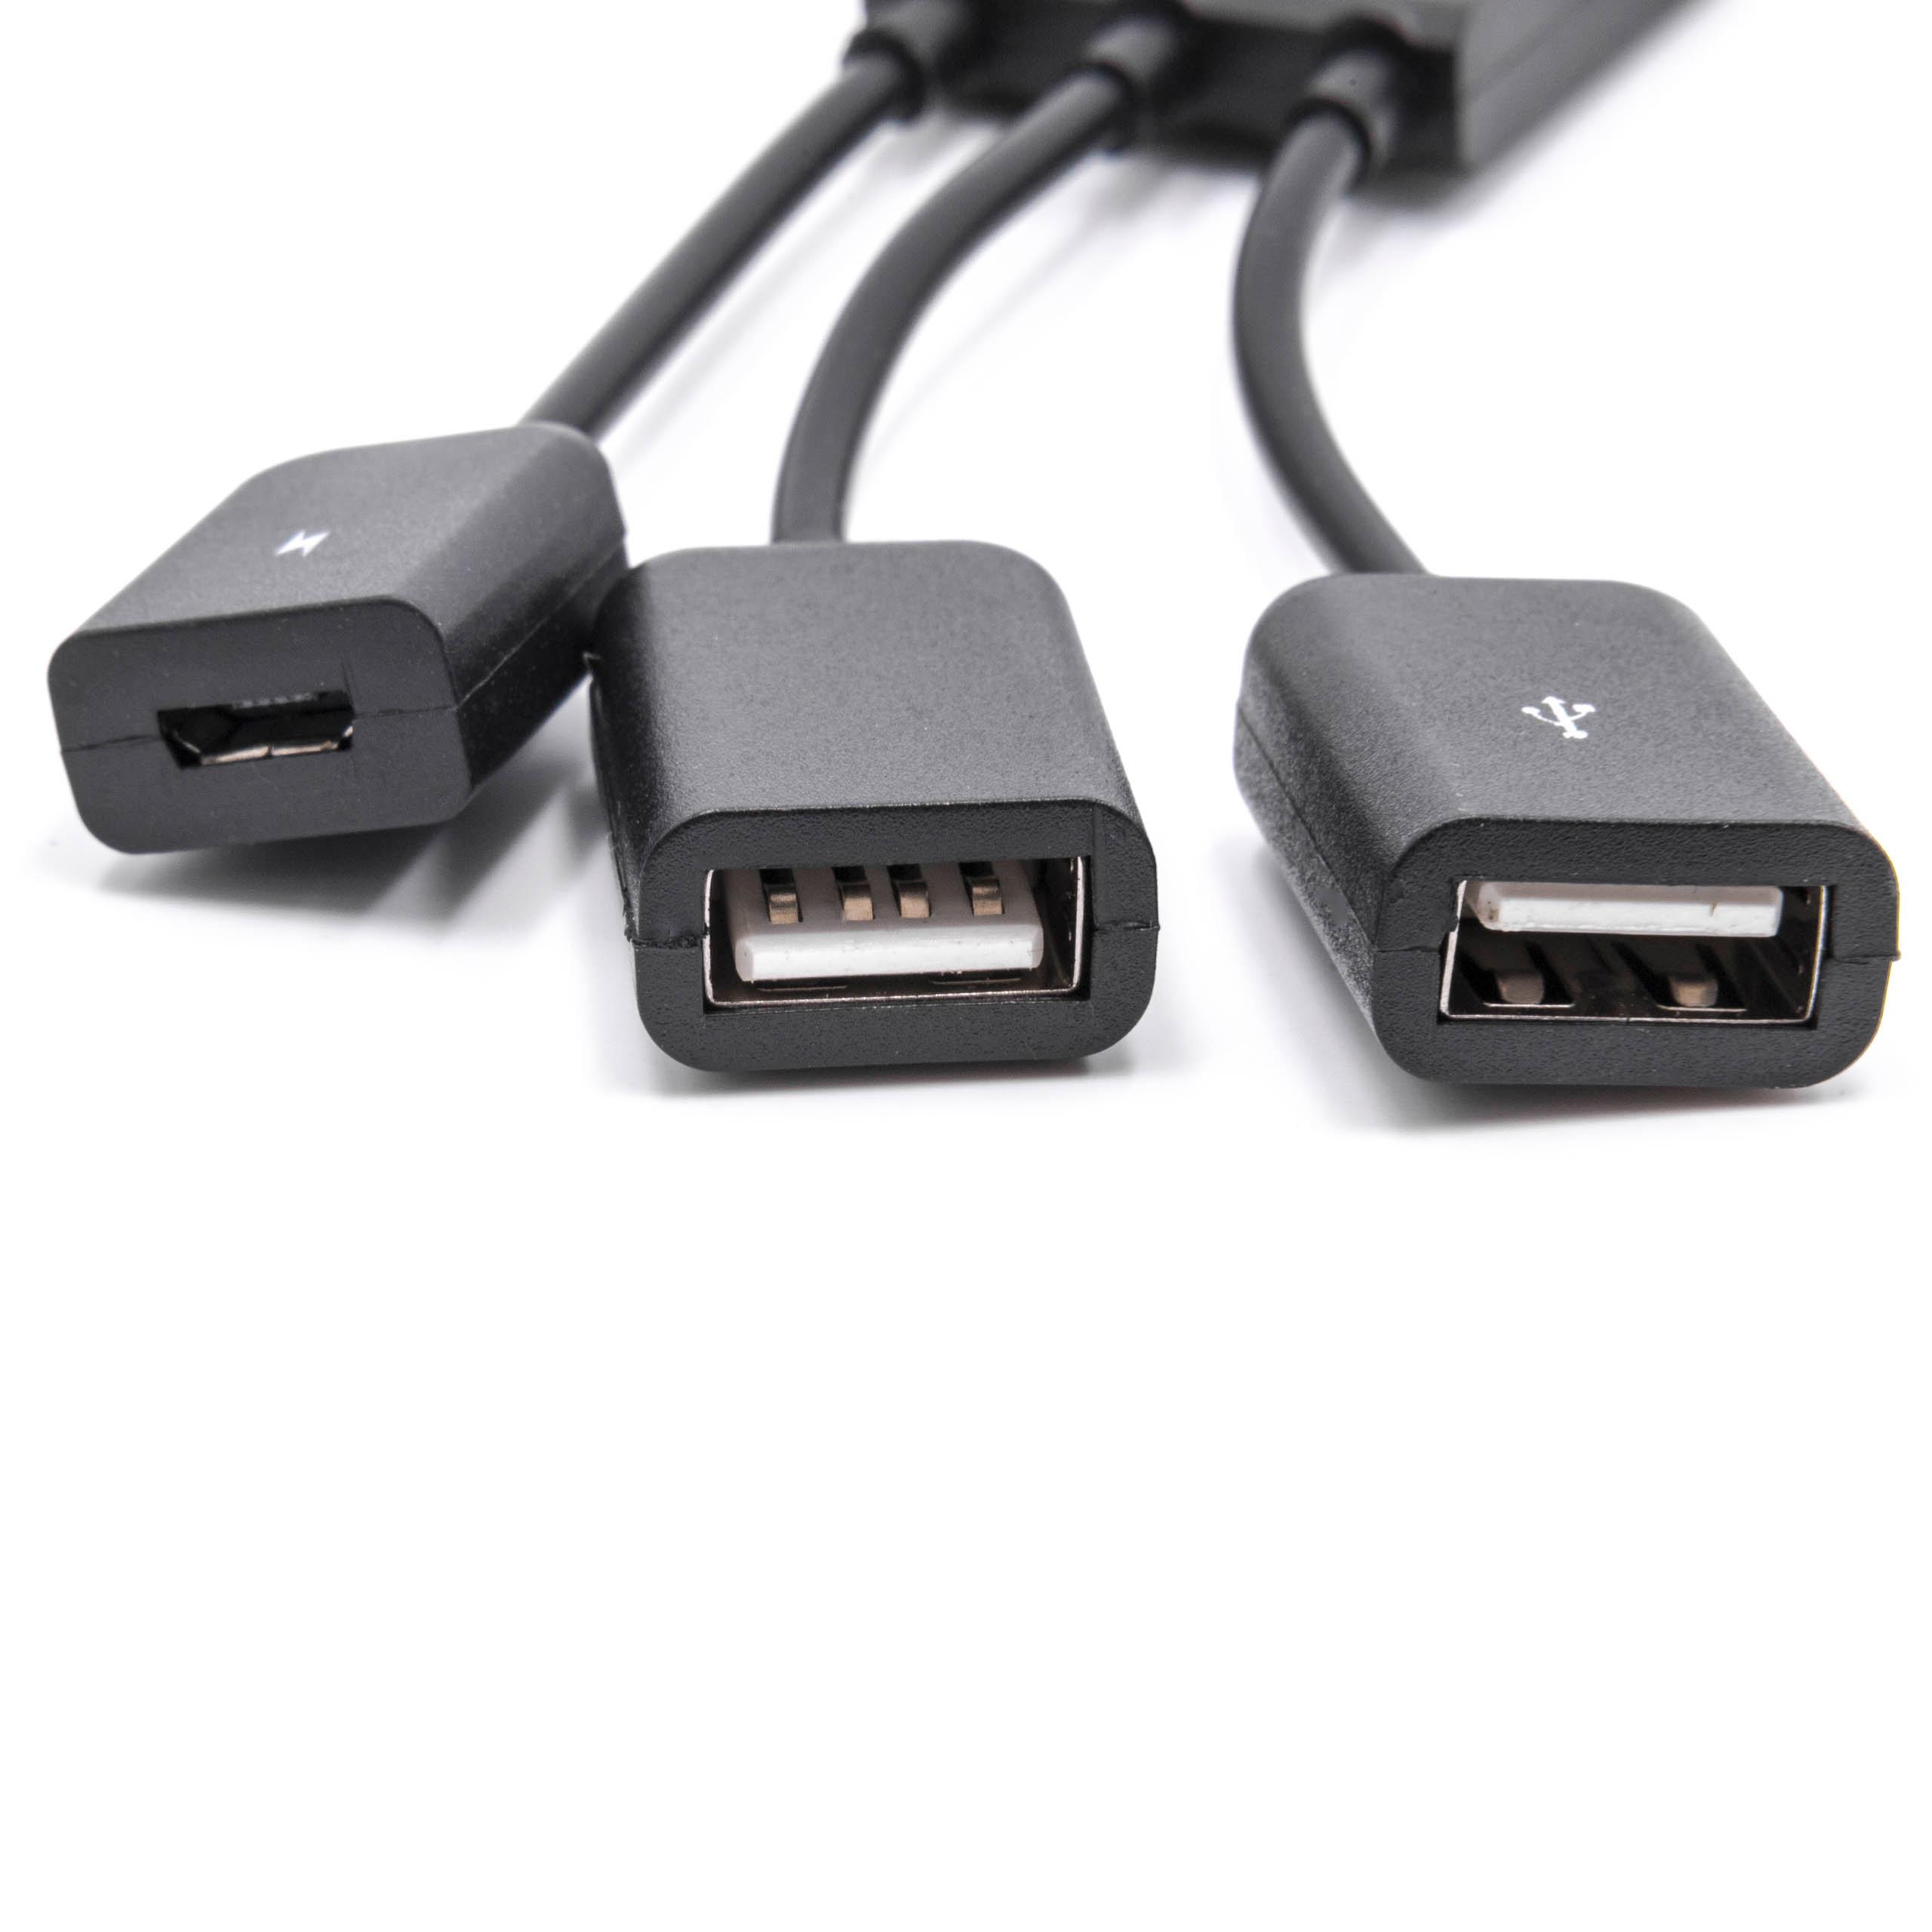 Adapter OTG USB type C (male) to micro USB port (female), 2x USB port (female) for smartphone, tablet, netbook